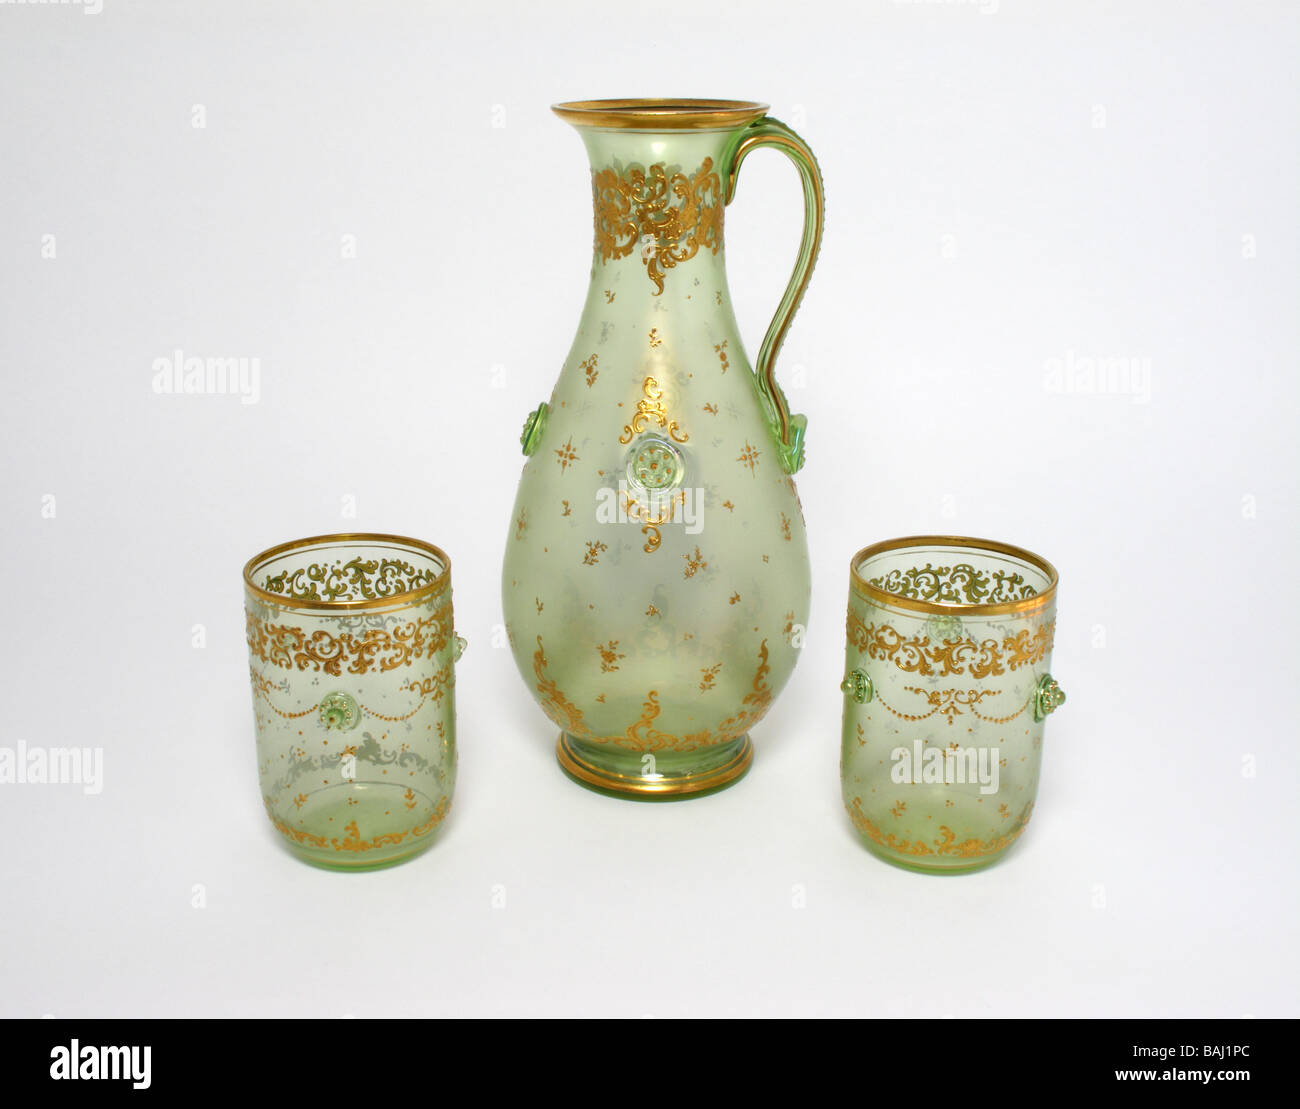 Antique iridescent glass jug and two beakers circa 1890 Stock Photo